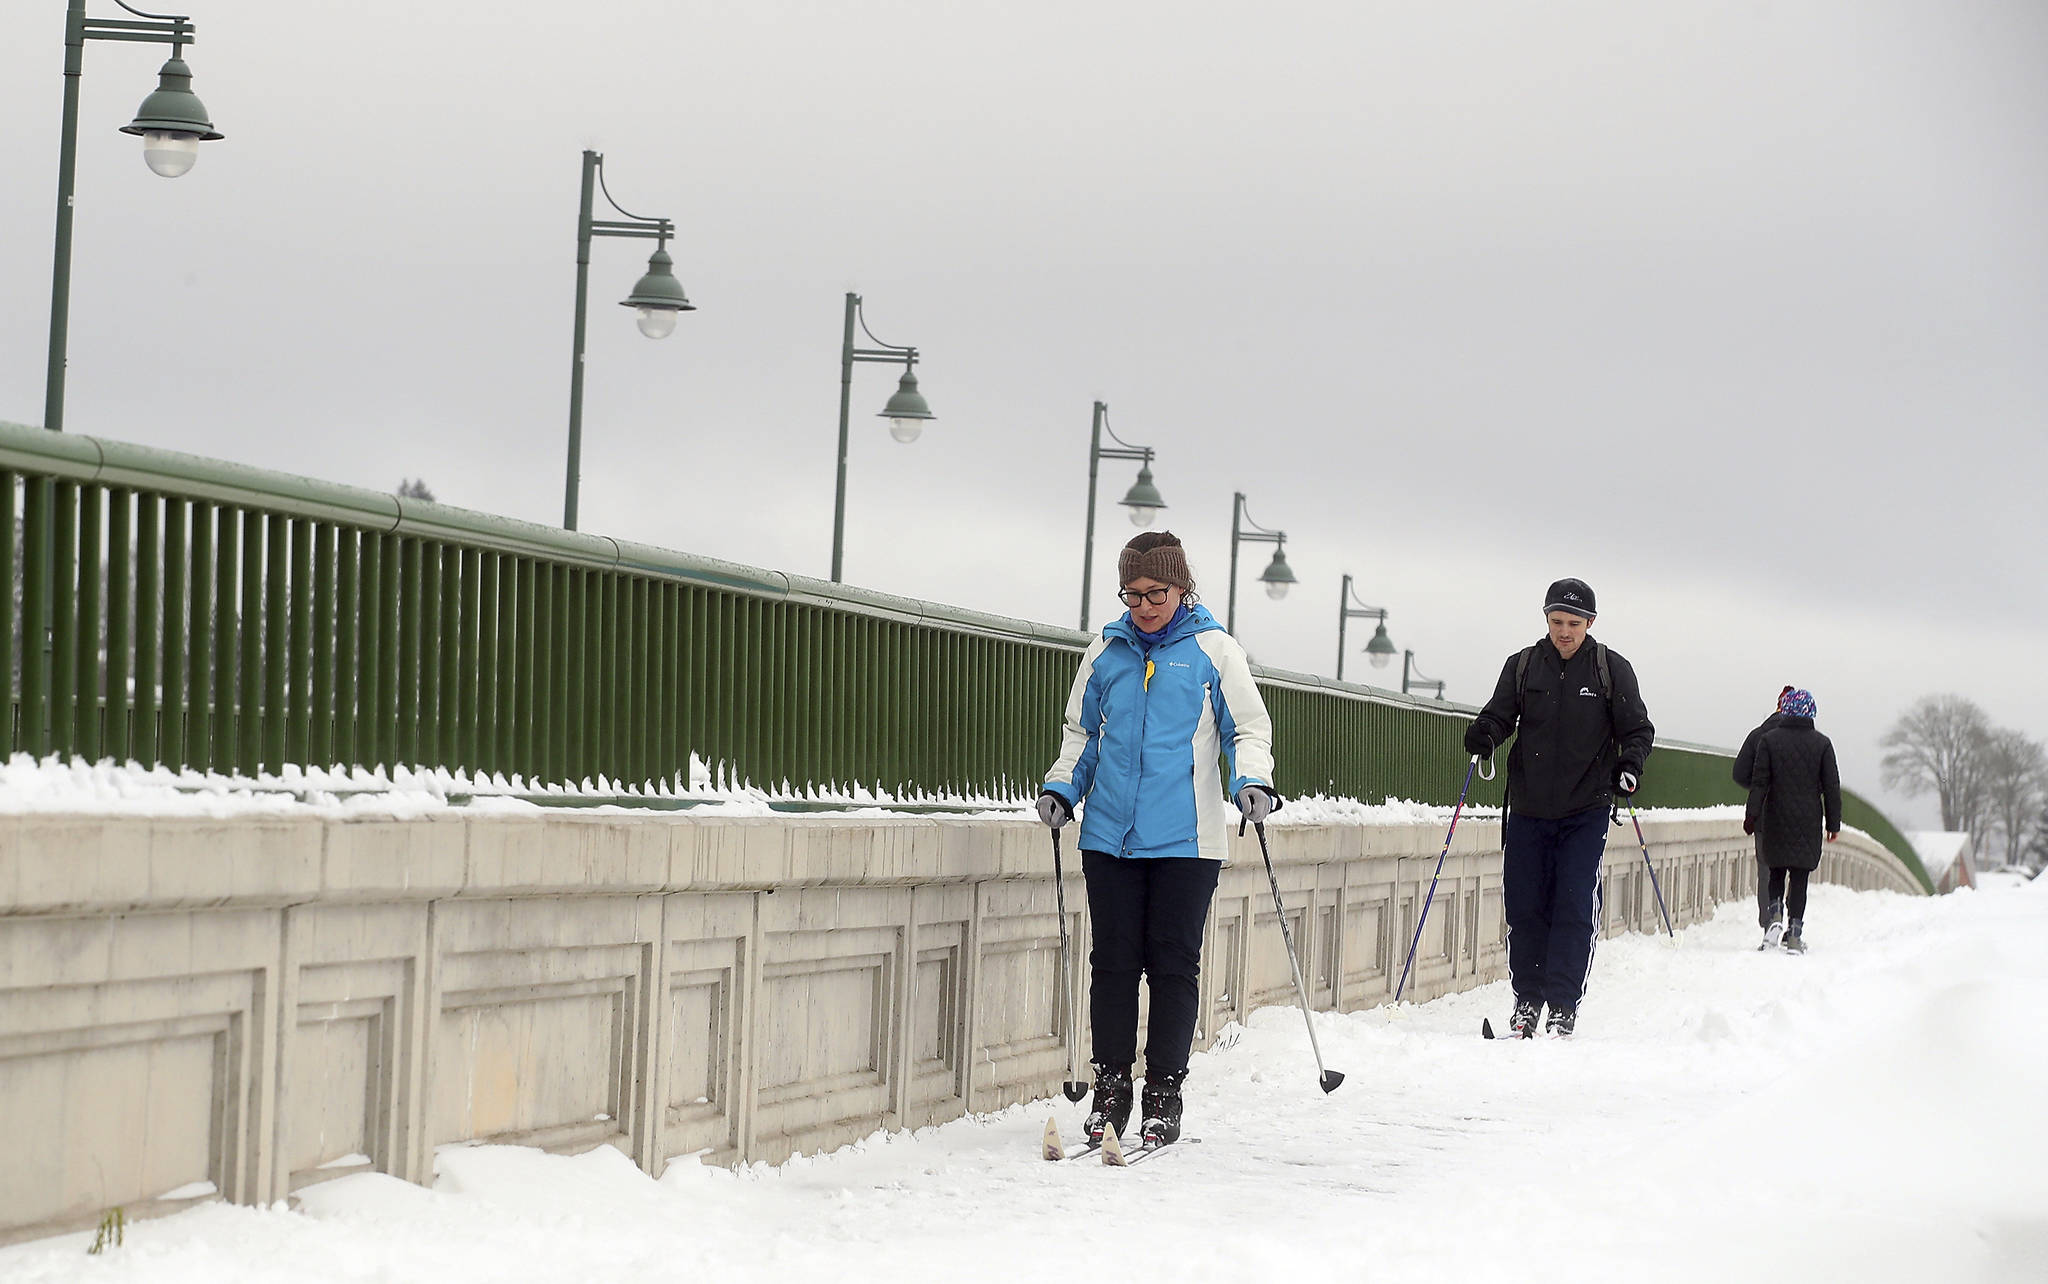 Erin Jaske and Scott Sandridge cross country ski across the Manette bridge in Bremerton, Wash., on a snowy day, in this Saturday, Feb. 13, 2021, file photo. During the pandemic, people around the world sought relief from lock downs and working from home in leisure sports. (Meegan M. Reid / Kitsap Sun)